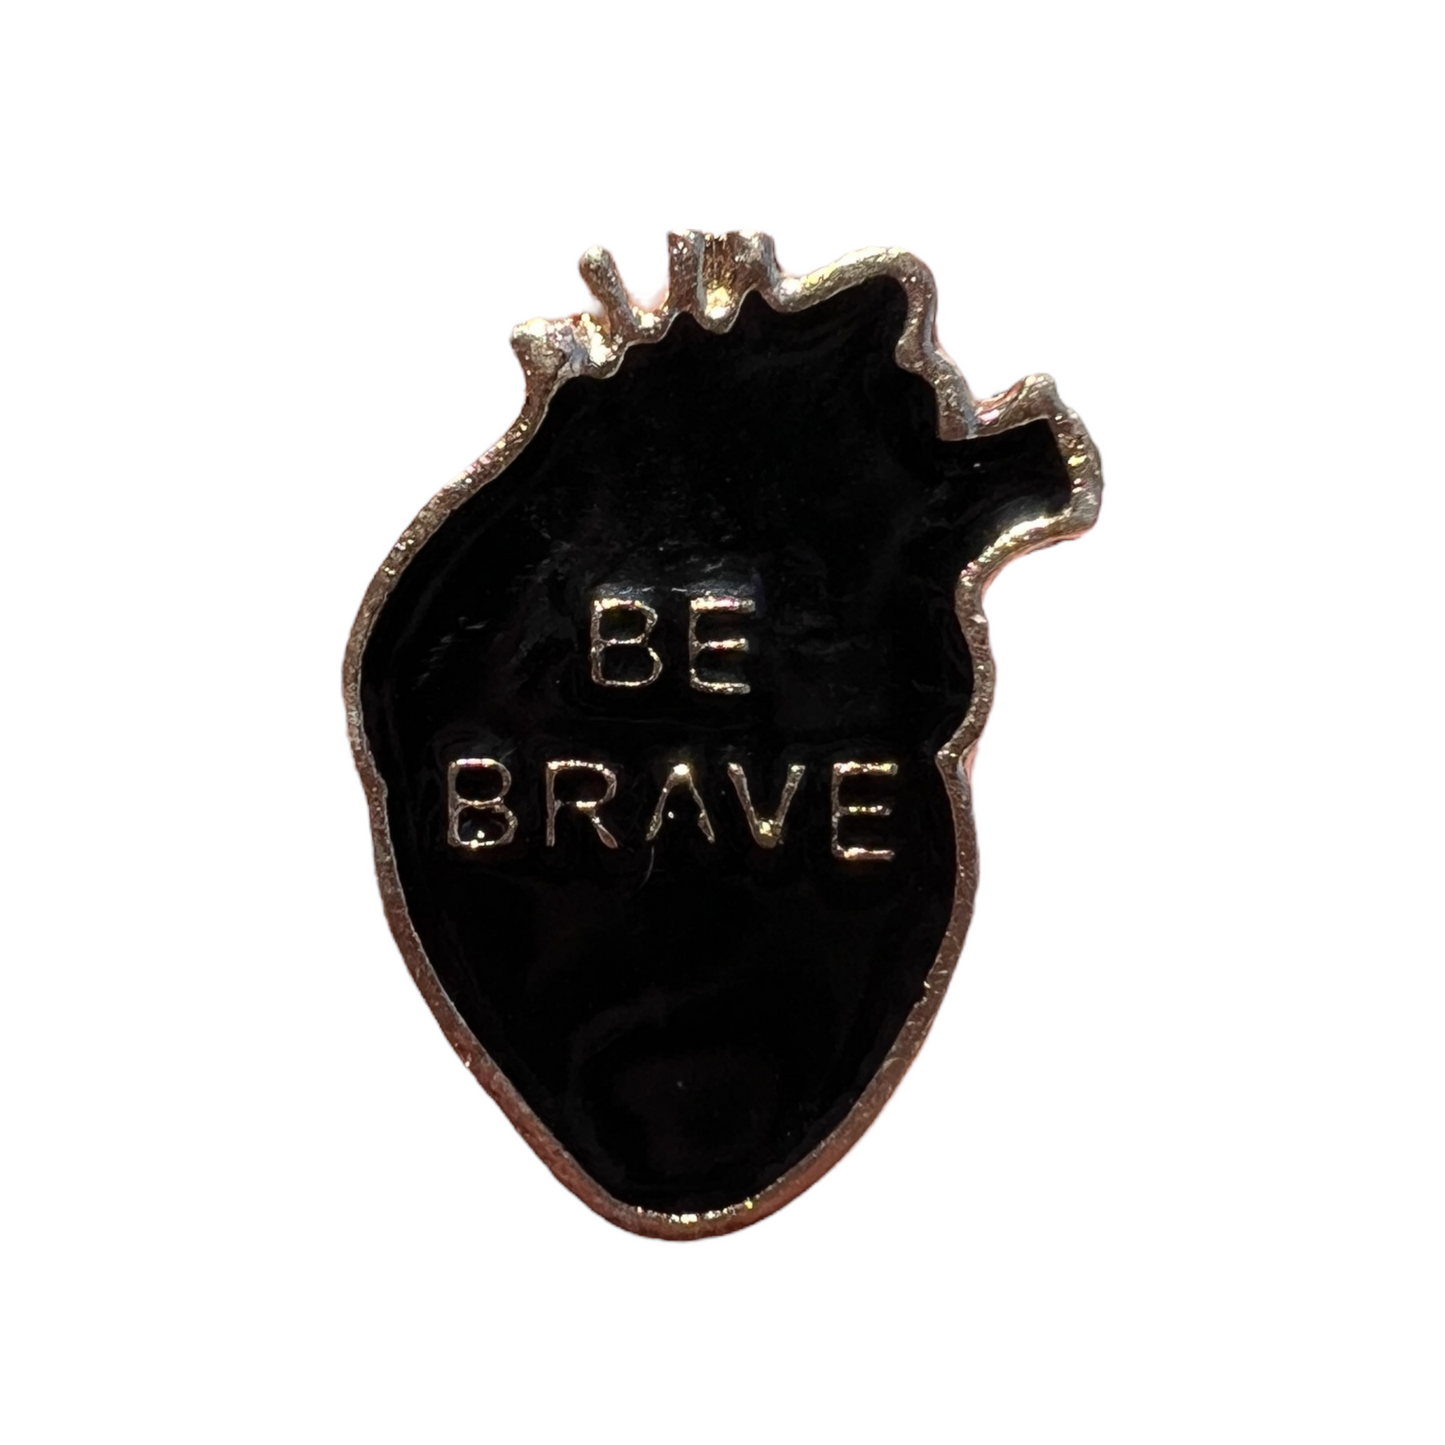 Pin — ‘Be Brave’ Heart